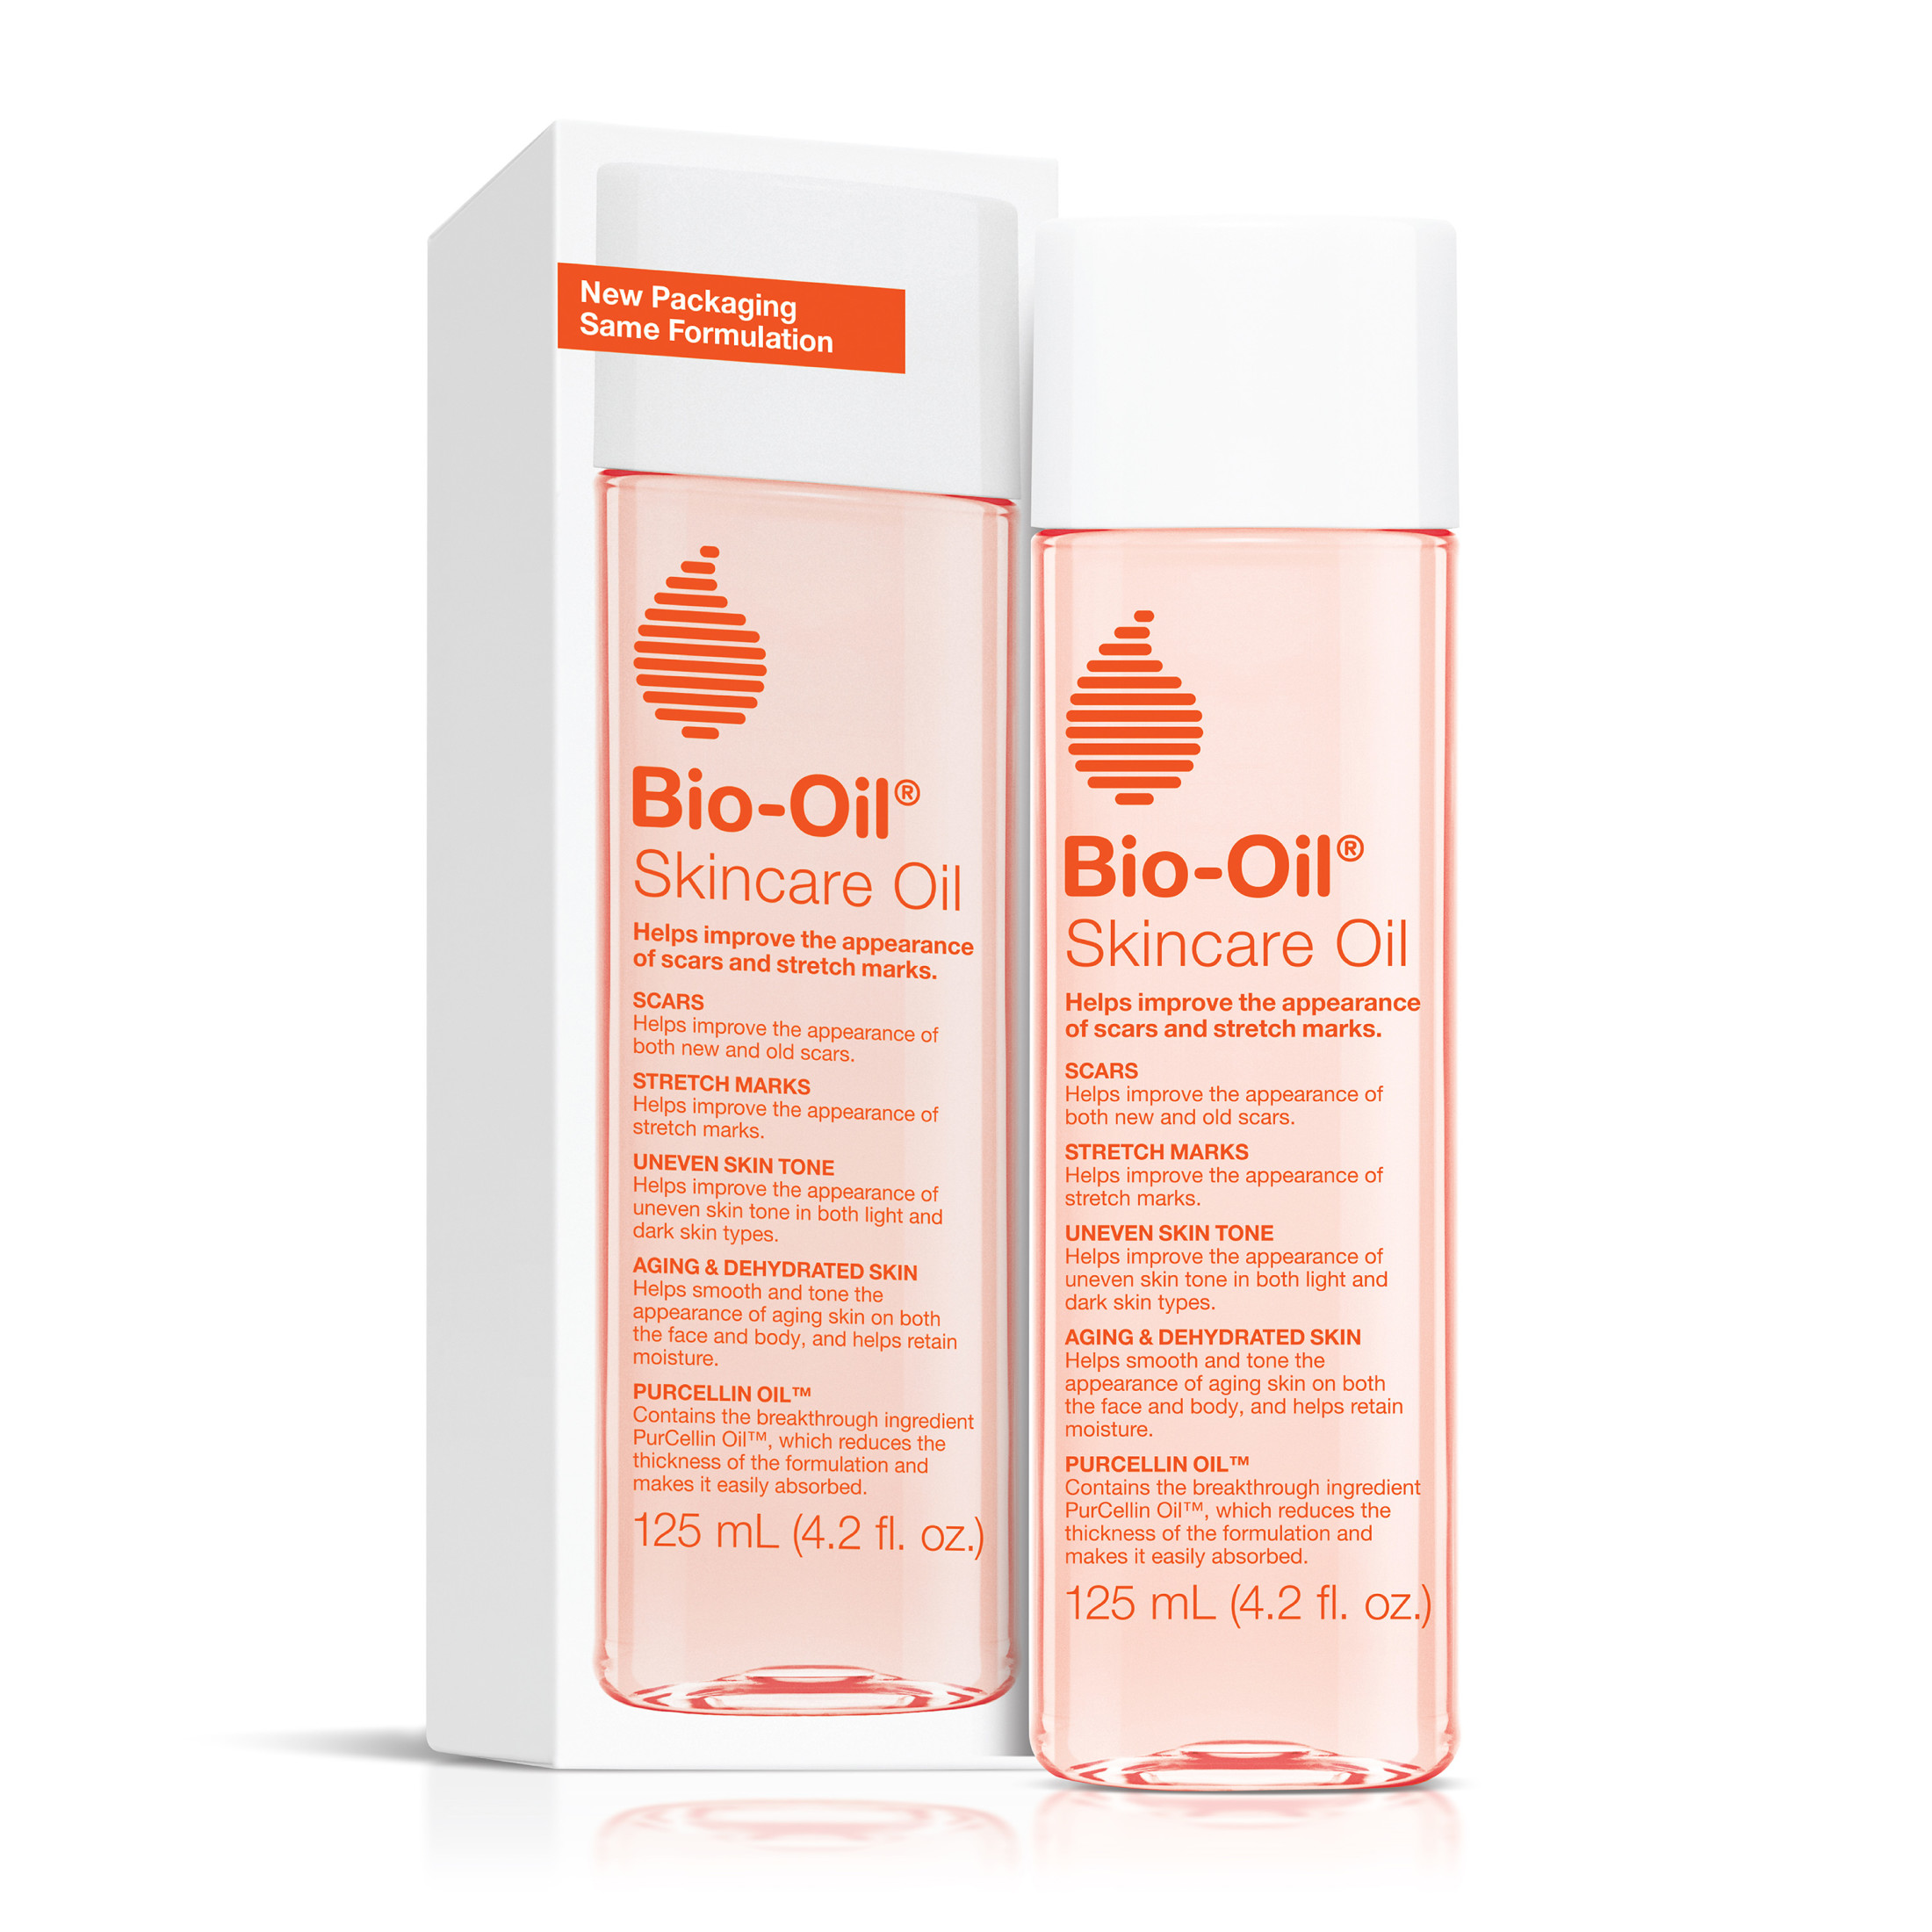 Bio-Oil Skincare Oil For Scars And Stretch Marks, Serum Hydrates Skin, 4.2 fl oz - image 1 of 11